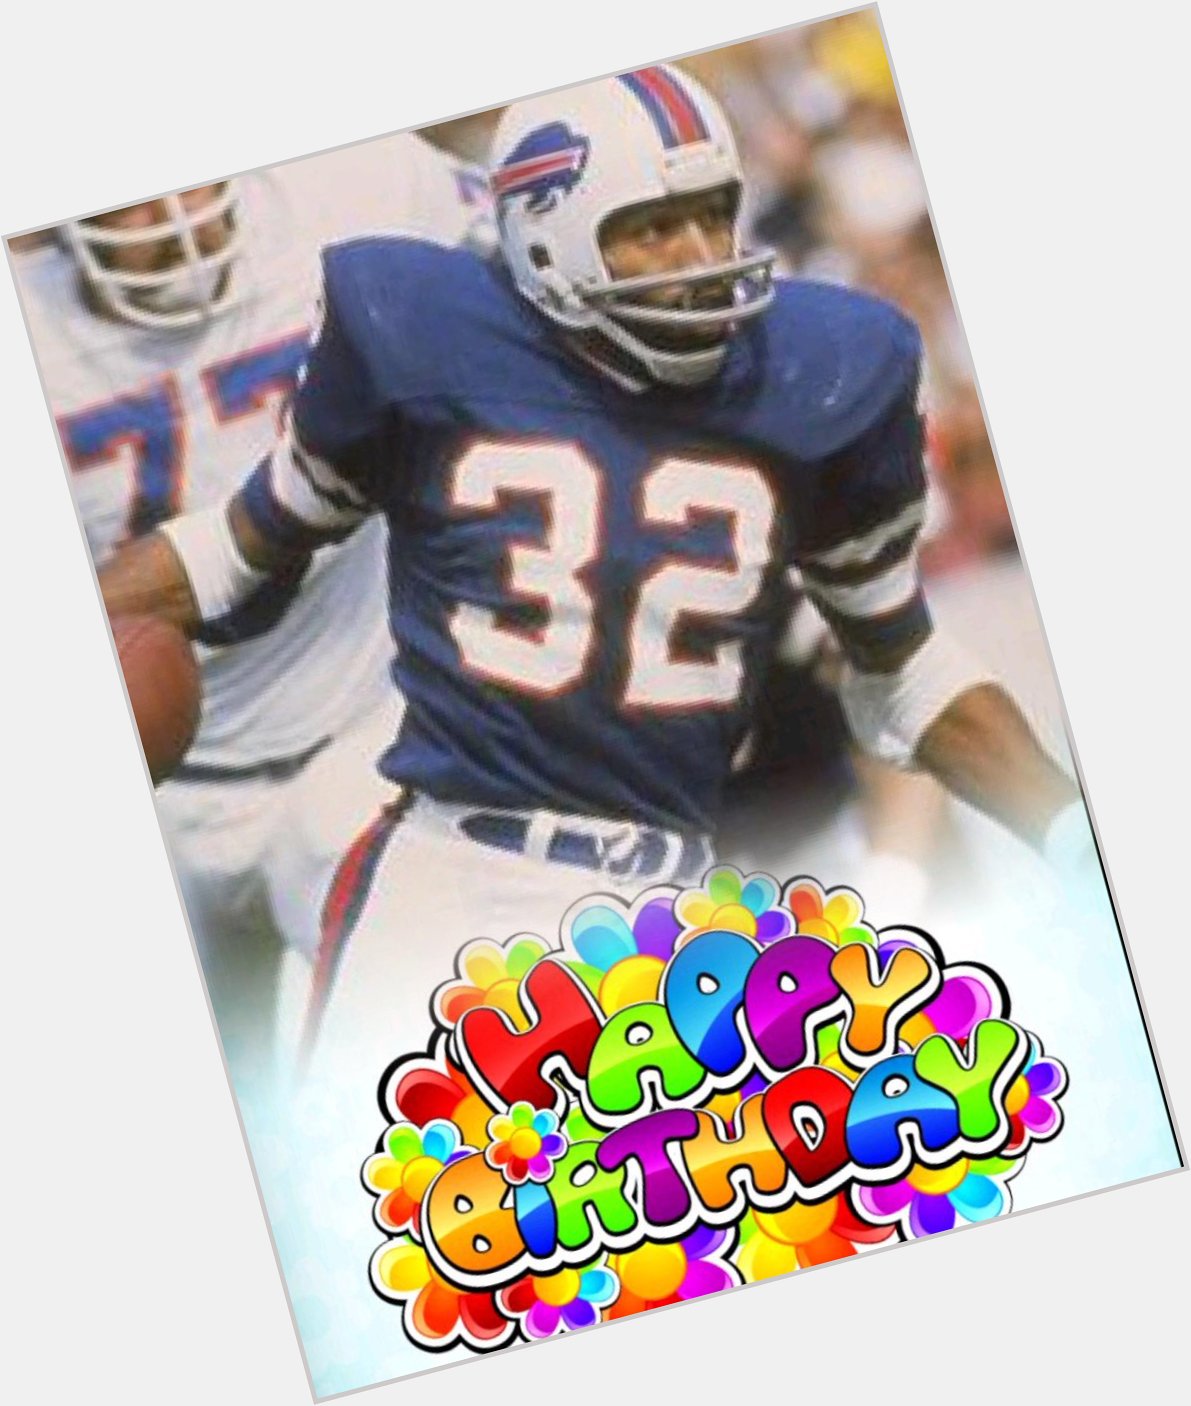 Happy Birthday to O.J. Simpson! Six pro bowls, four time NFL rushing champion, NFL MVP, and a HOFer! 